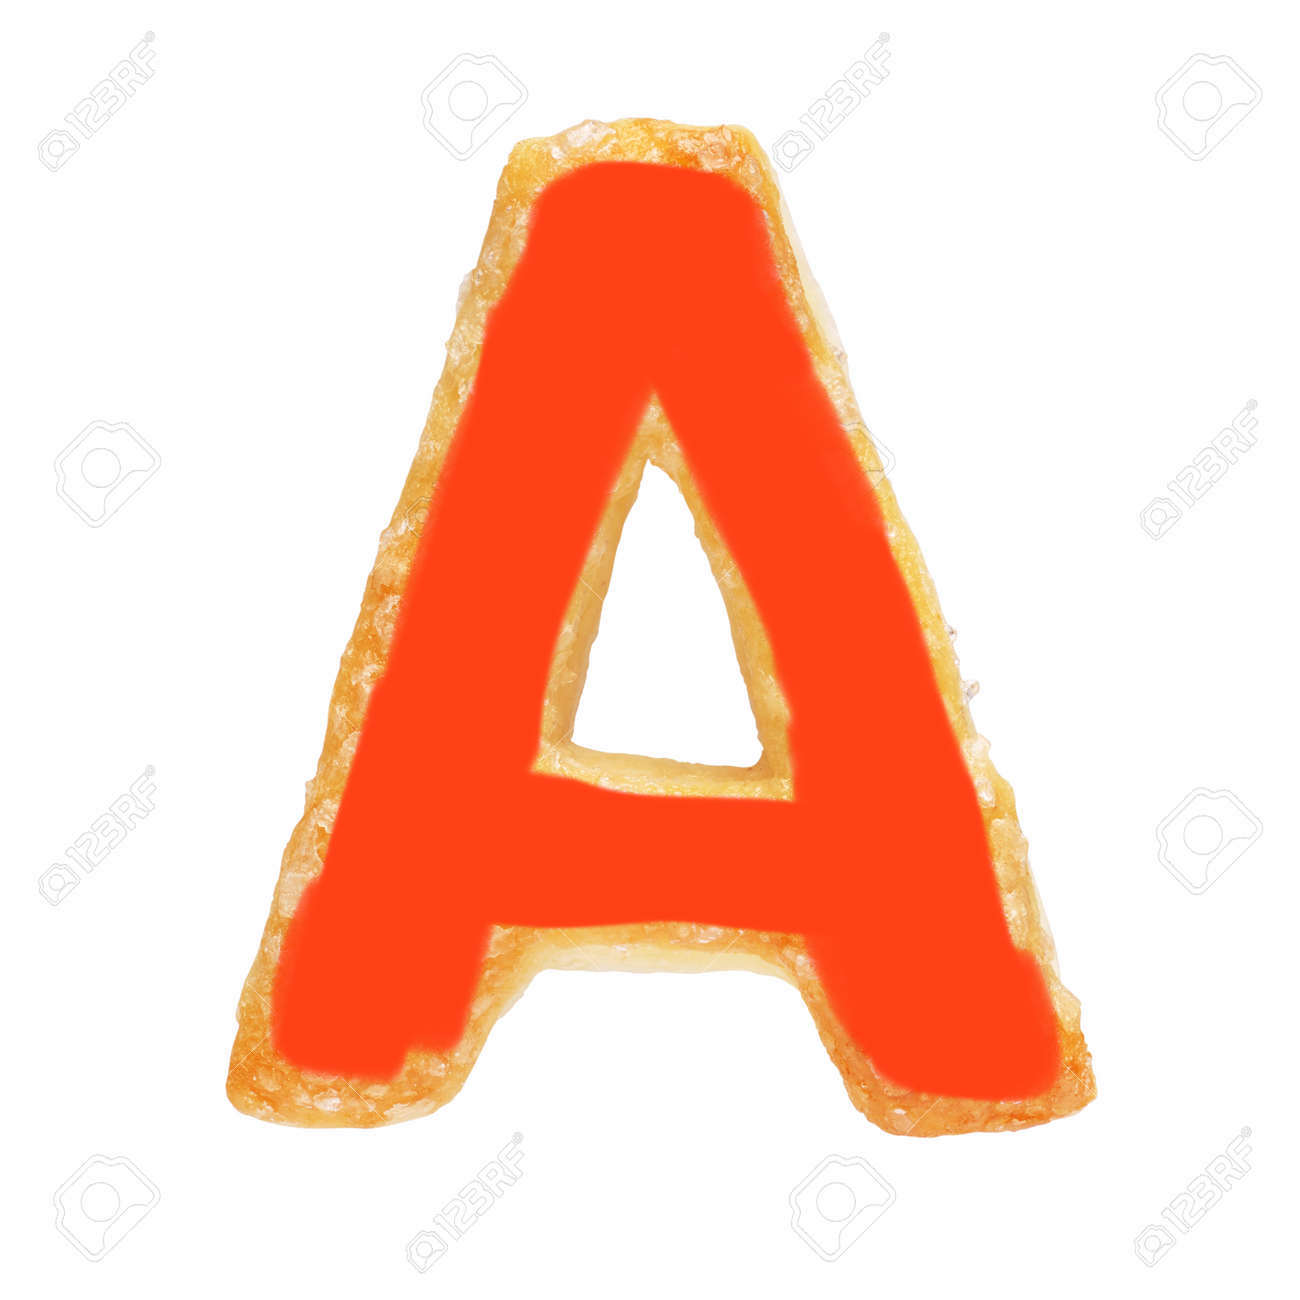  Letter A From Baked Dough of Cookie